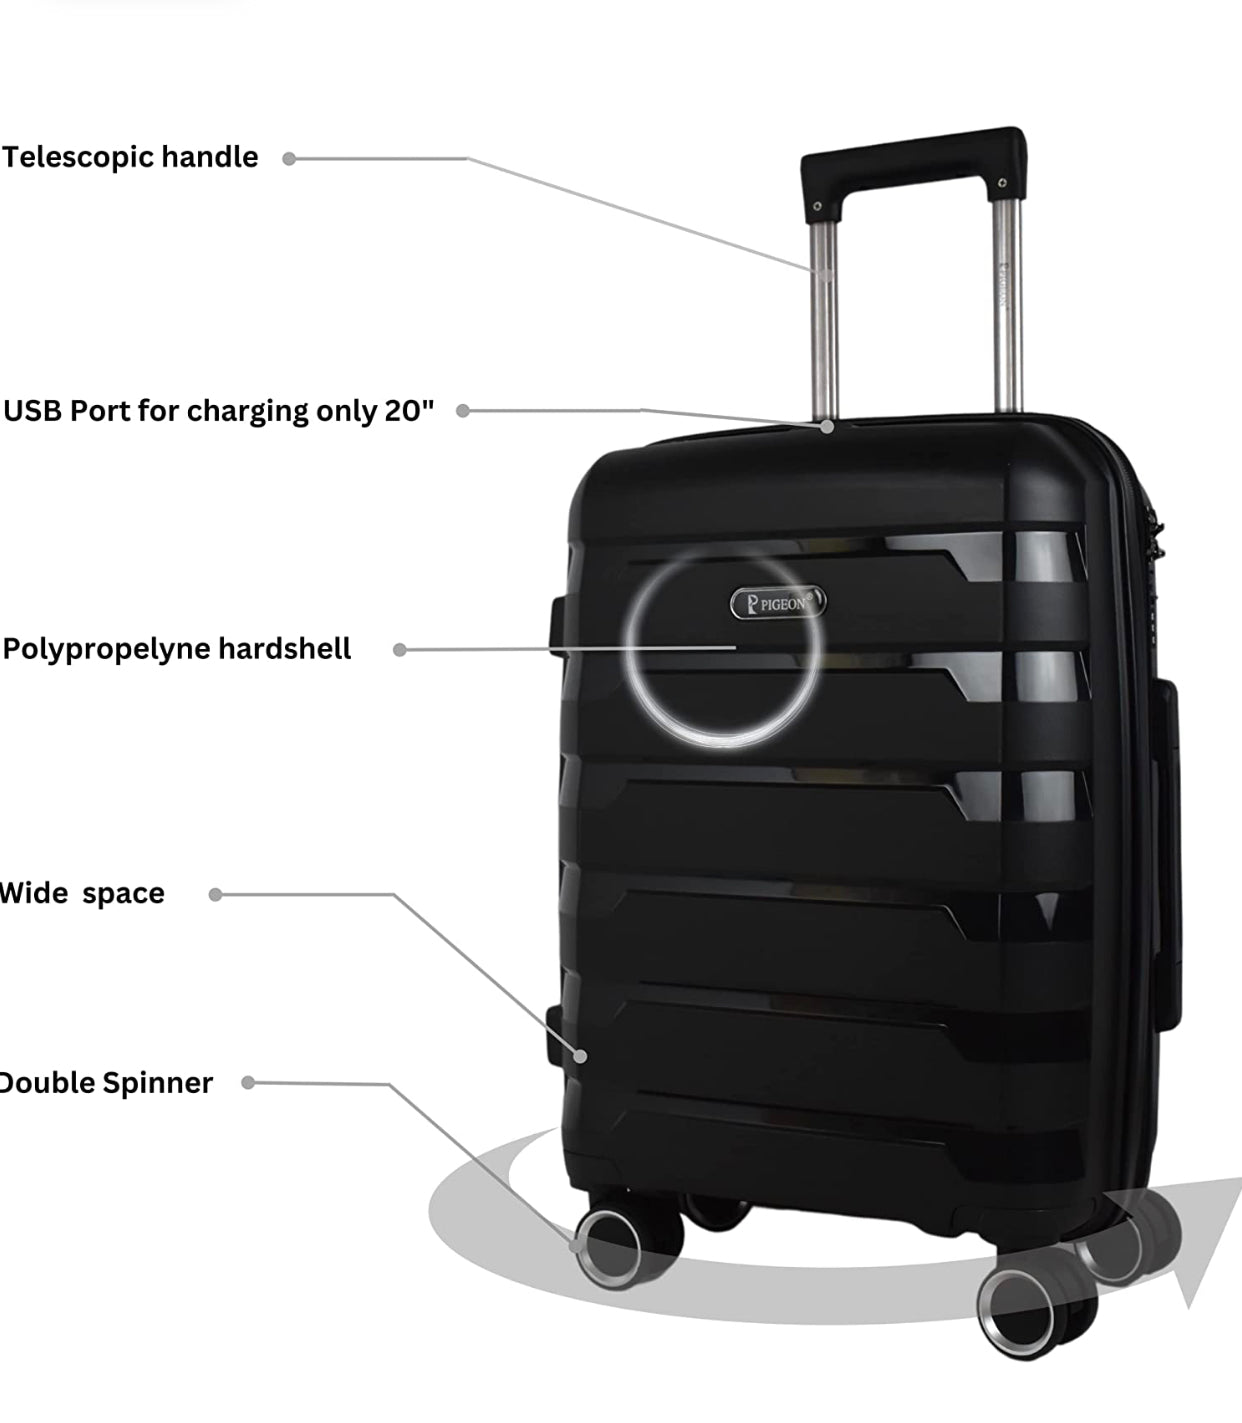 PIGEON New black Luggage Carry On 20 Inch PP with USB port